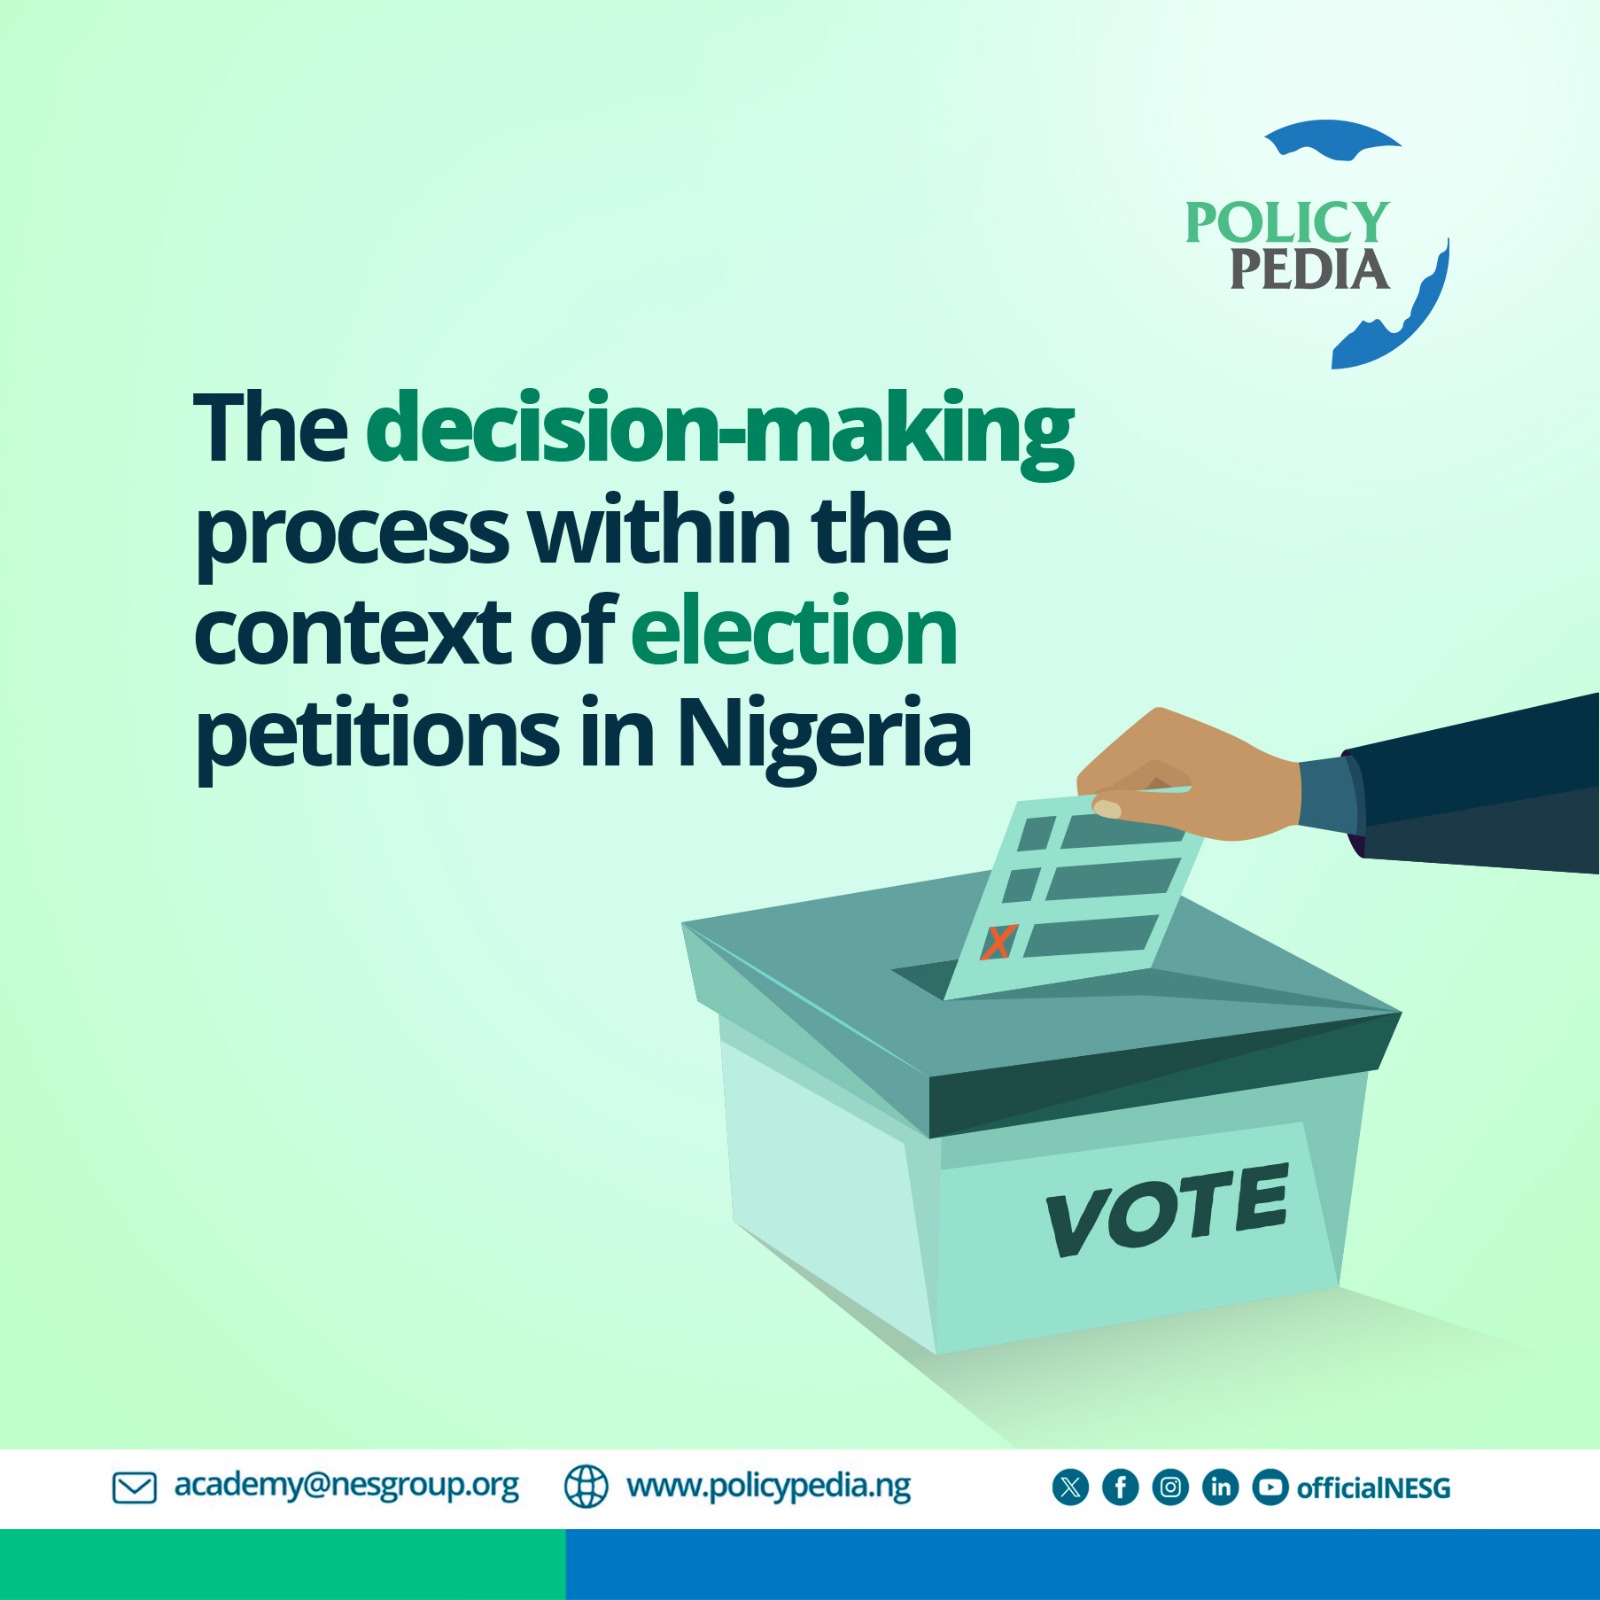 The decision-making process within the context of election petitions in Nigeria